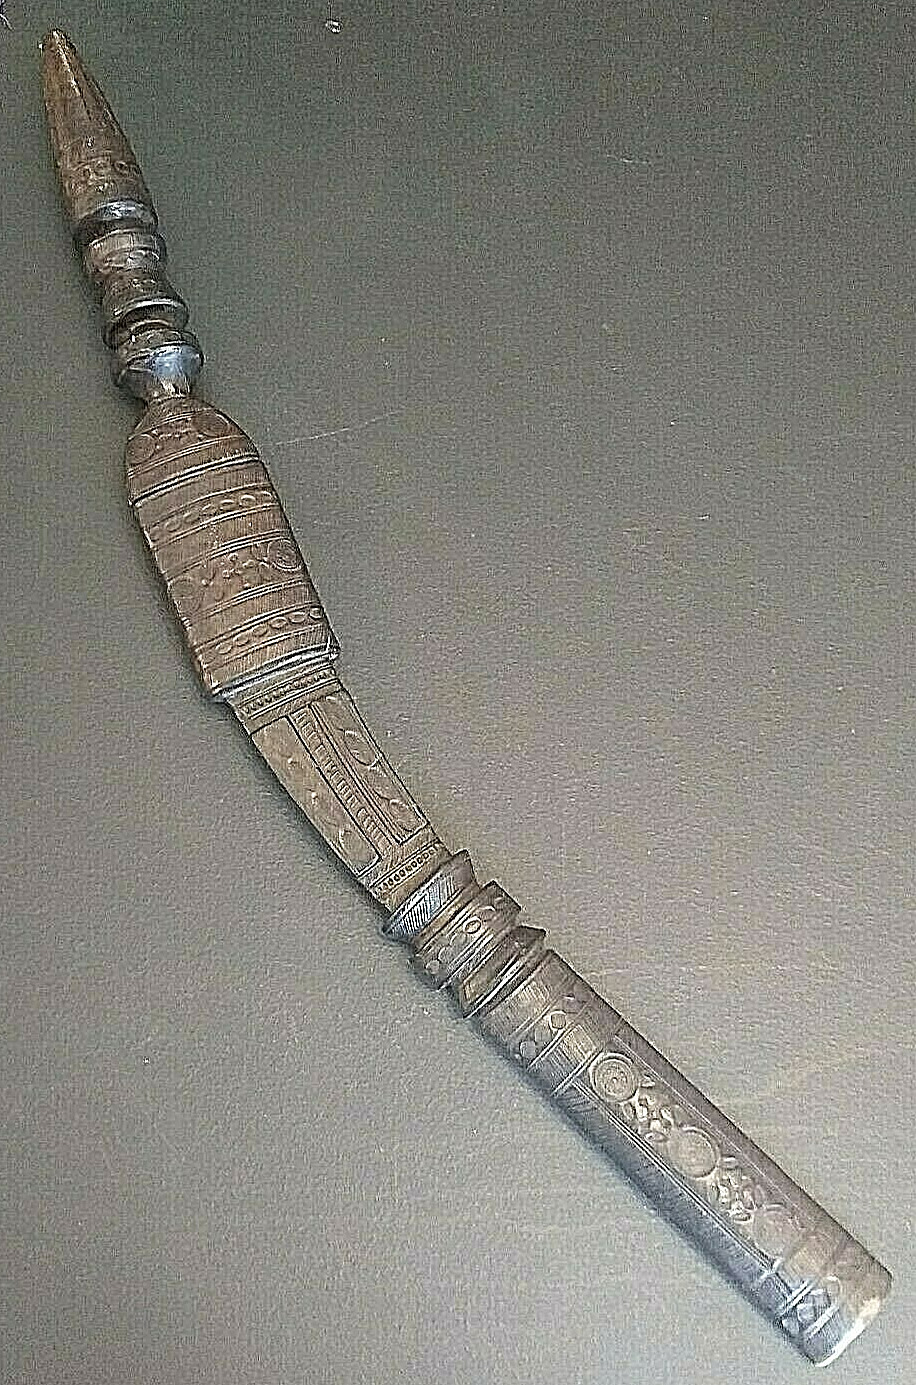 Hand Made Fixed Blade Sword Knife Made in Mali West Africa By Tuareg Tribe Old